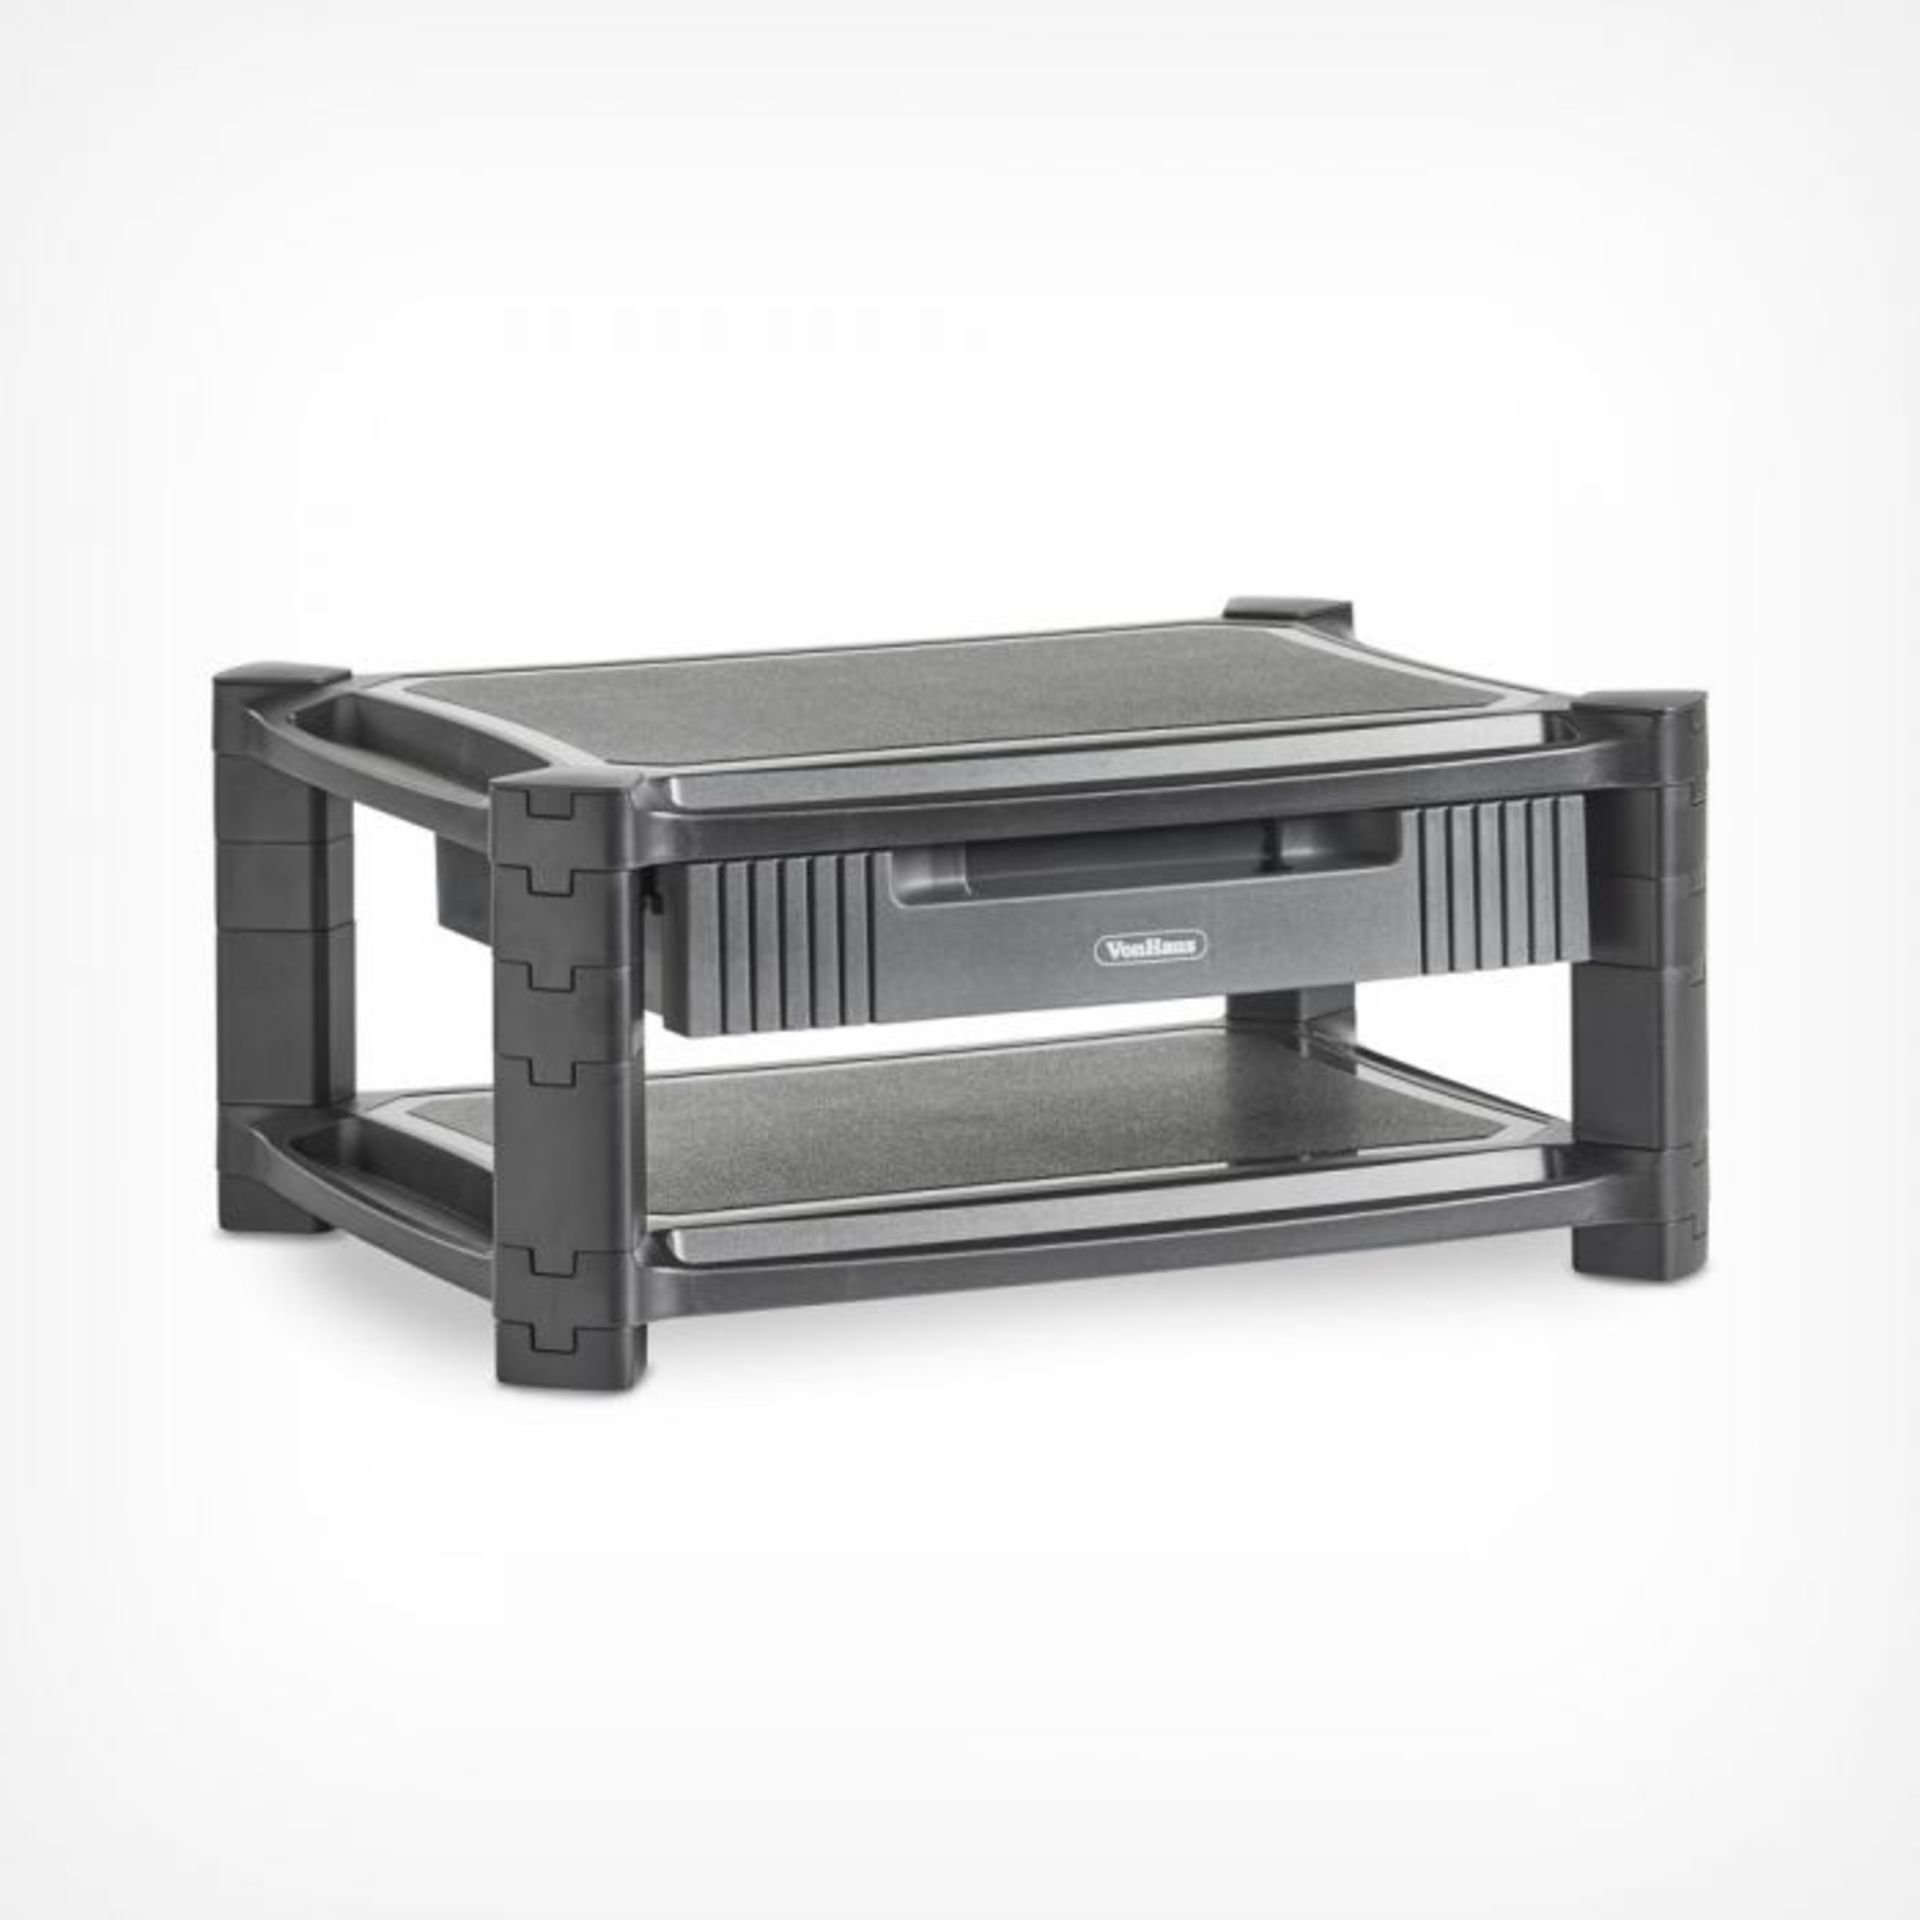 (S435) Monitor Stand with Drawer Adjustable height smart stand with two shelves and drawer for... - Image 2 of 4